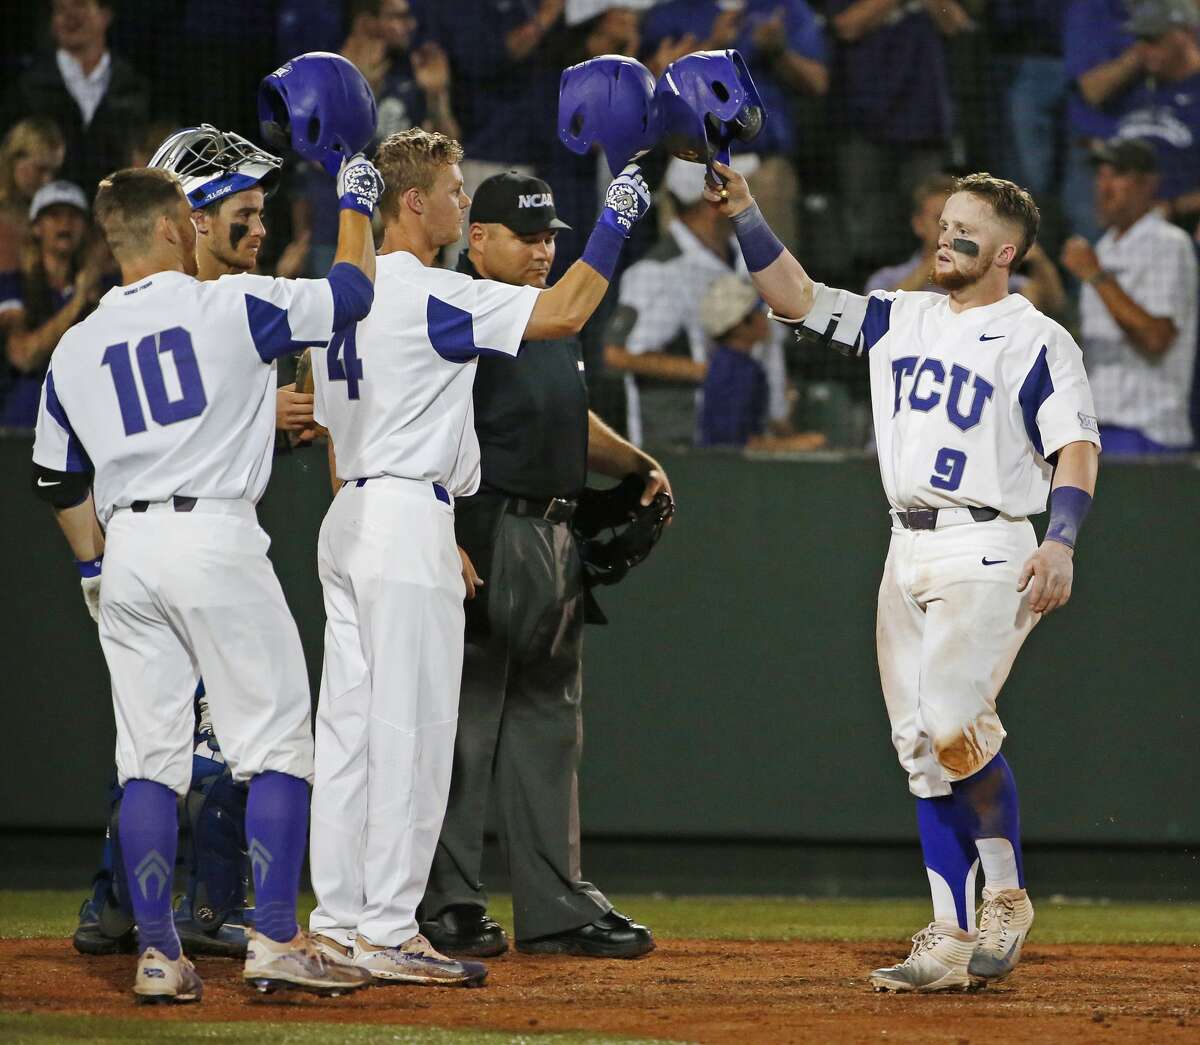 TCU catcher Evan Skoug (9) arrives at home plate after his 3-run home run in the eighth inning against Central Connecticut State during an NCAA college baseball regional on Saturday, June 3, 2017, in Fort Worth, Texas. (Paul Moseley/Star-Telegram via AP)